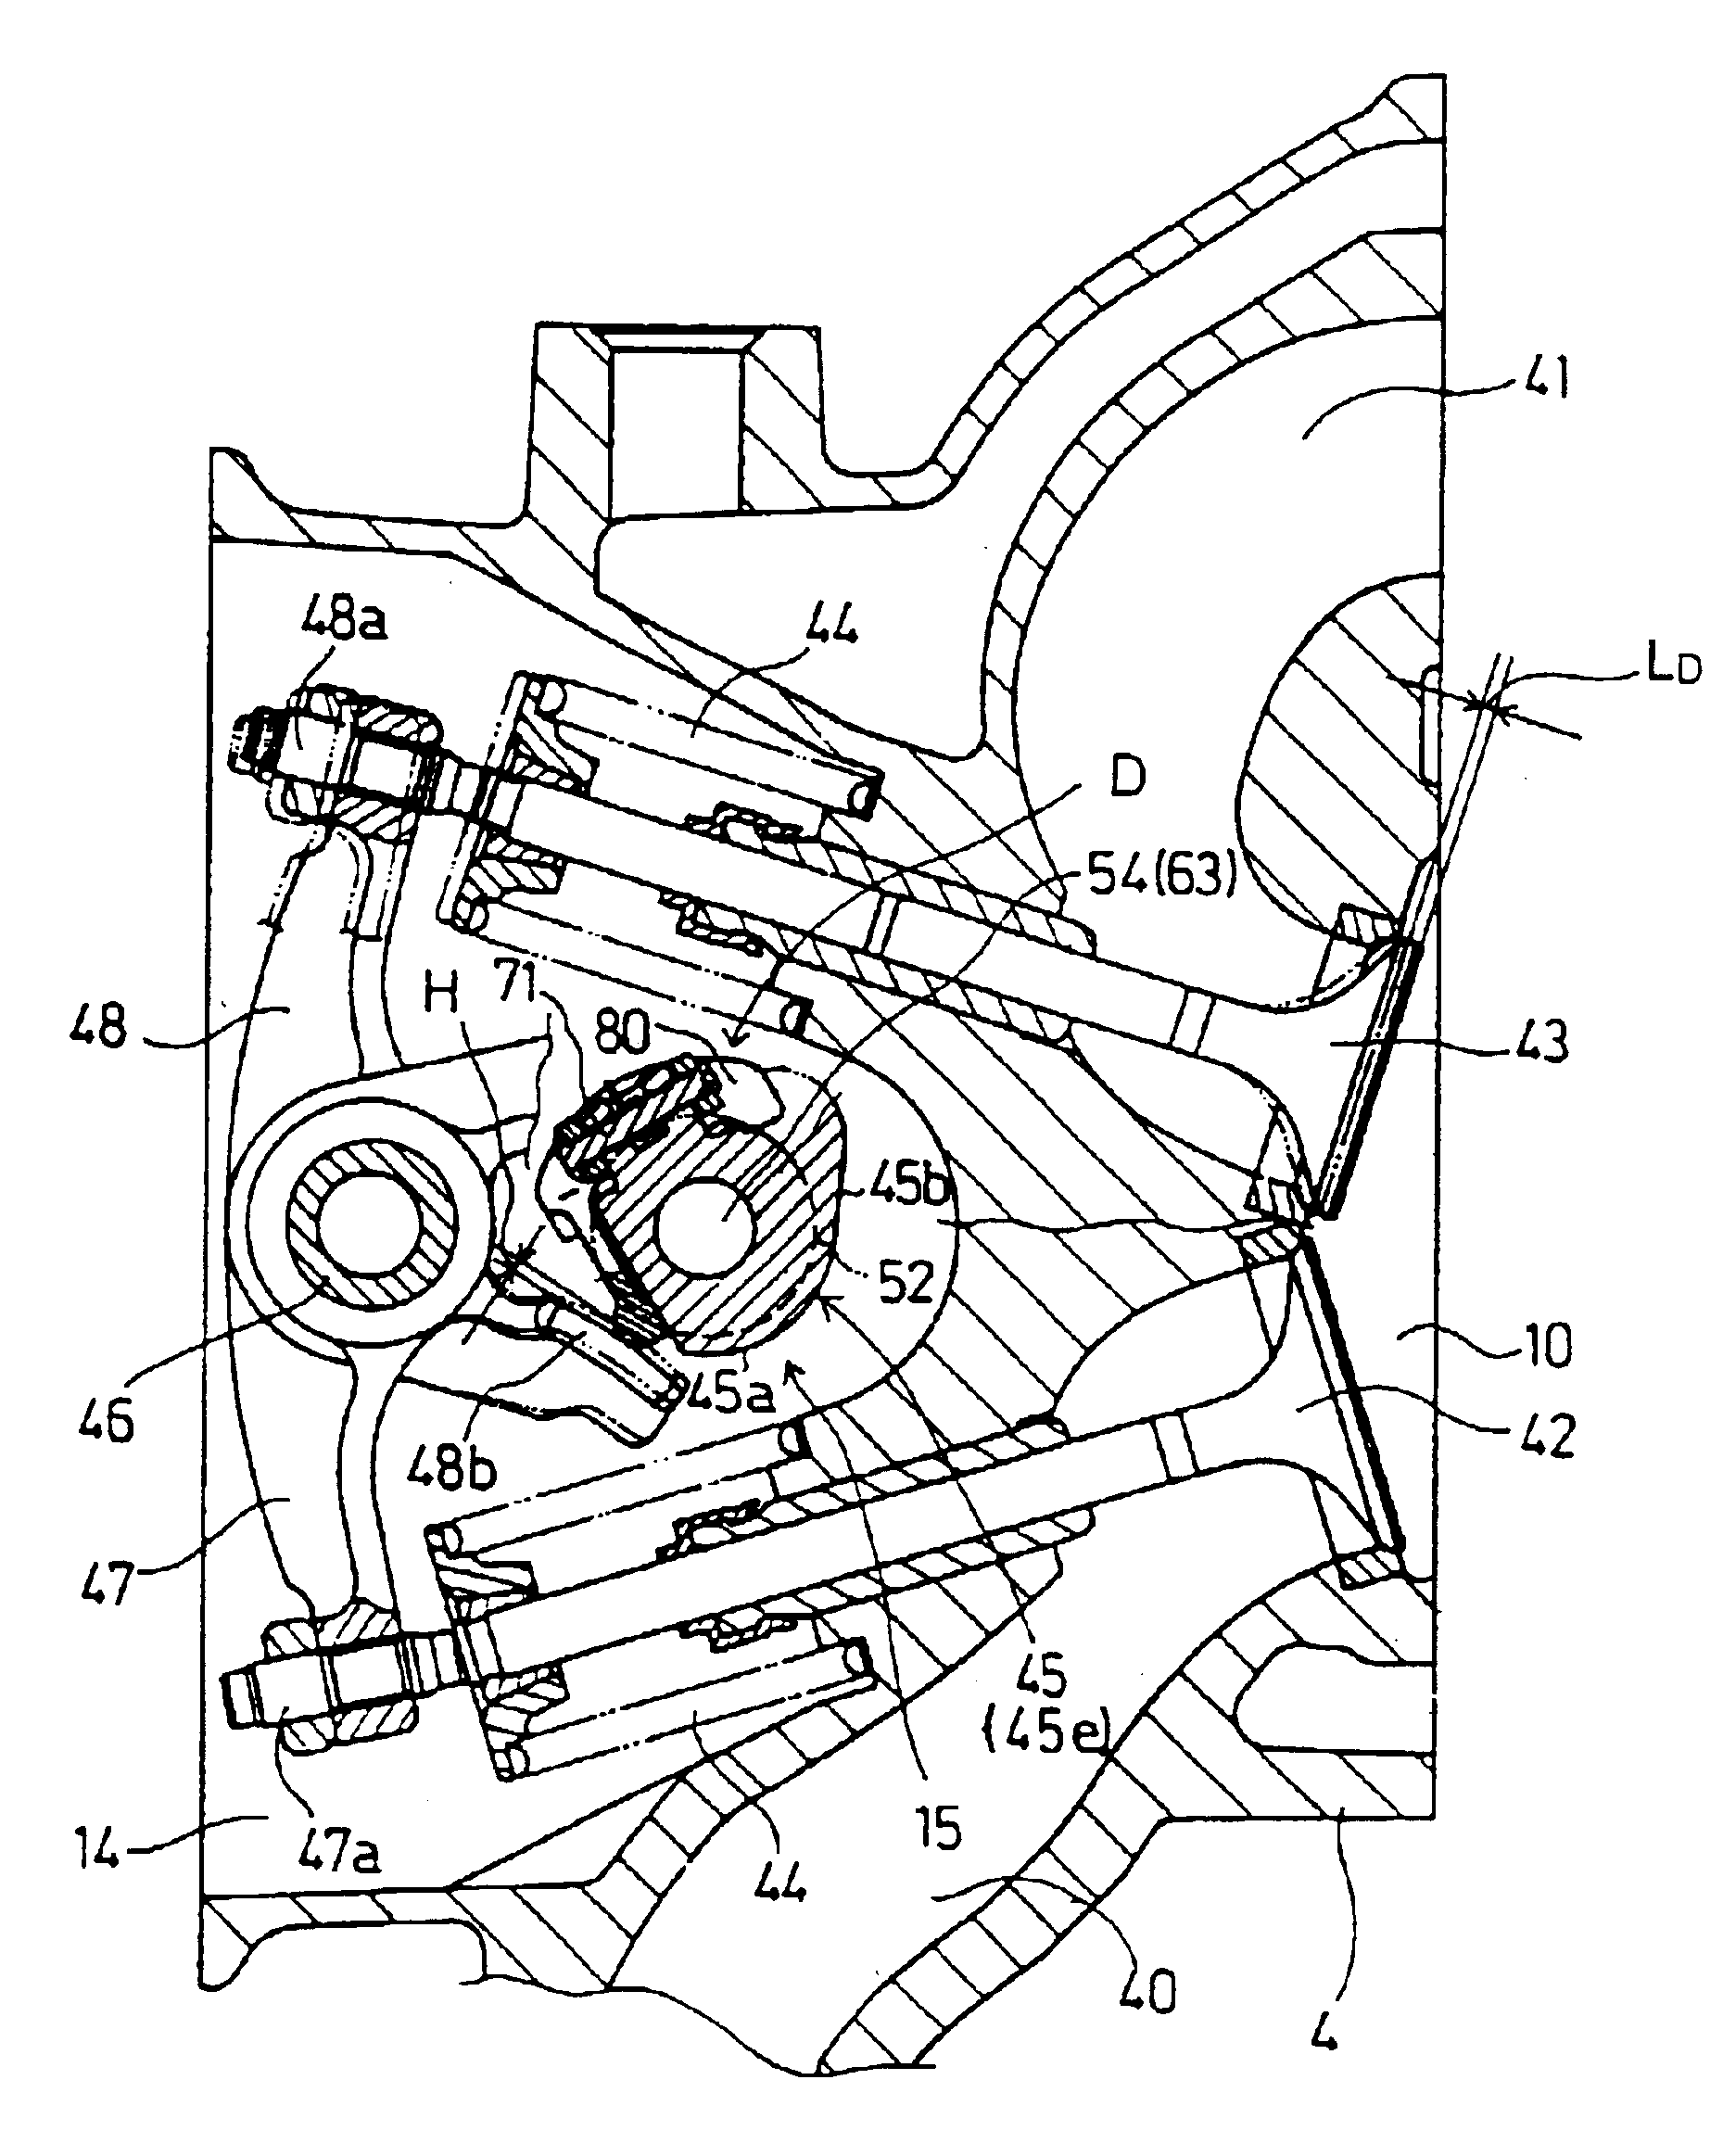 Internal combustion engine provided with decompressing mechanism